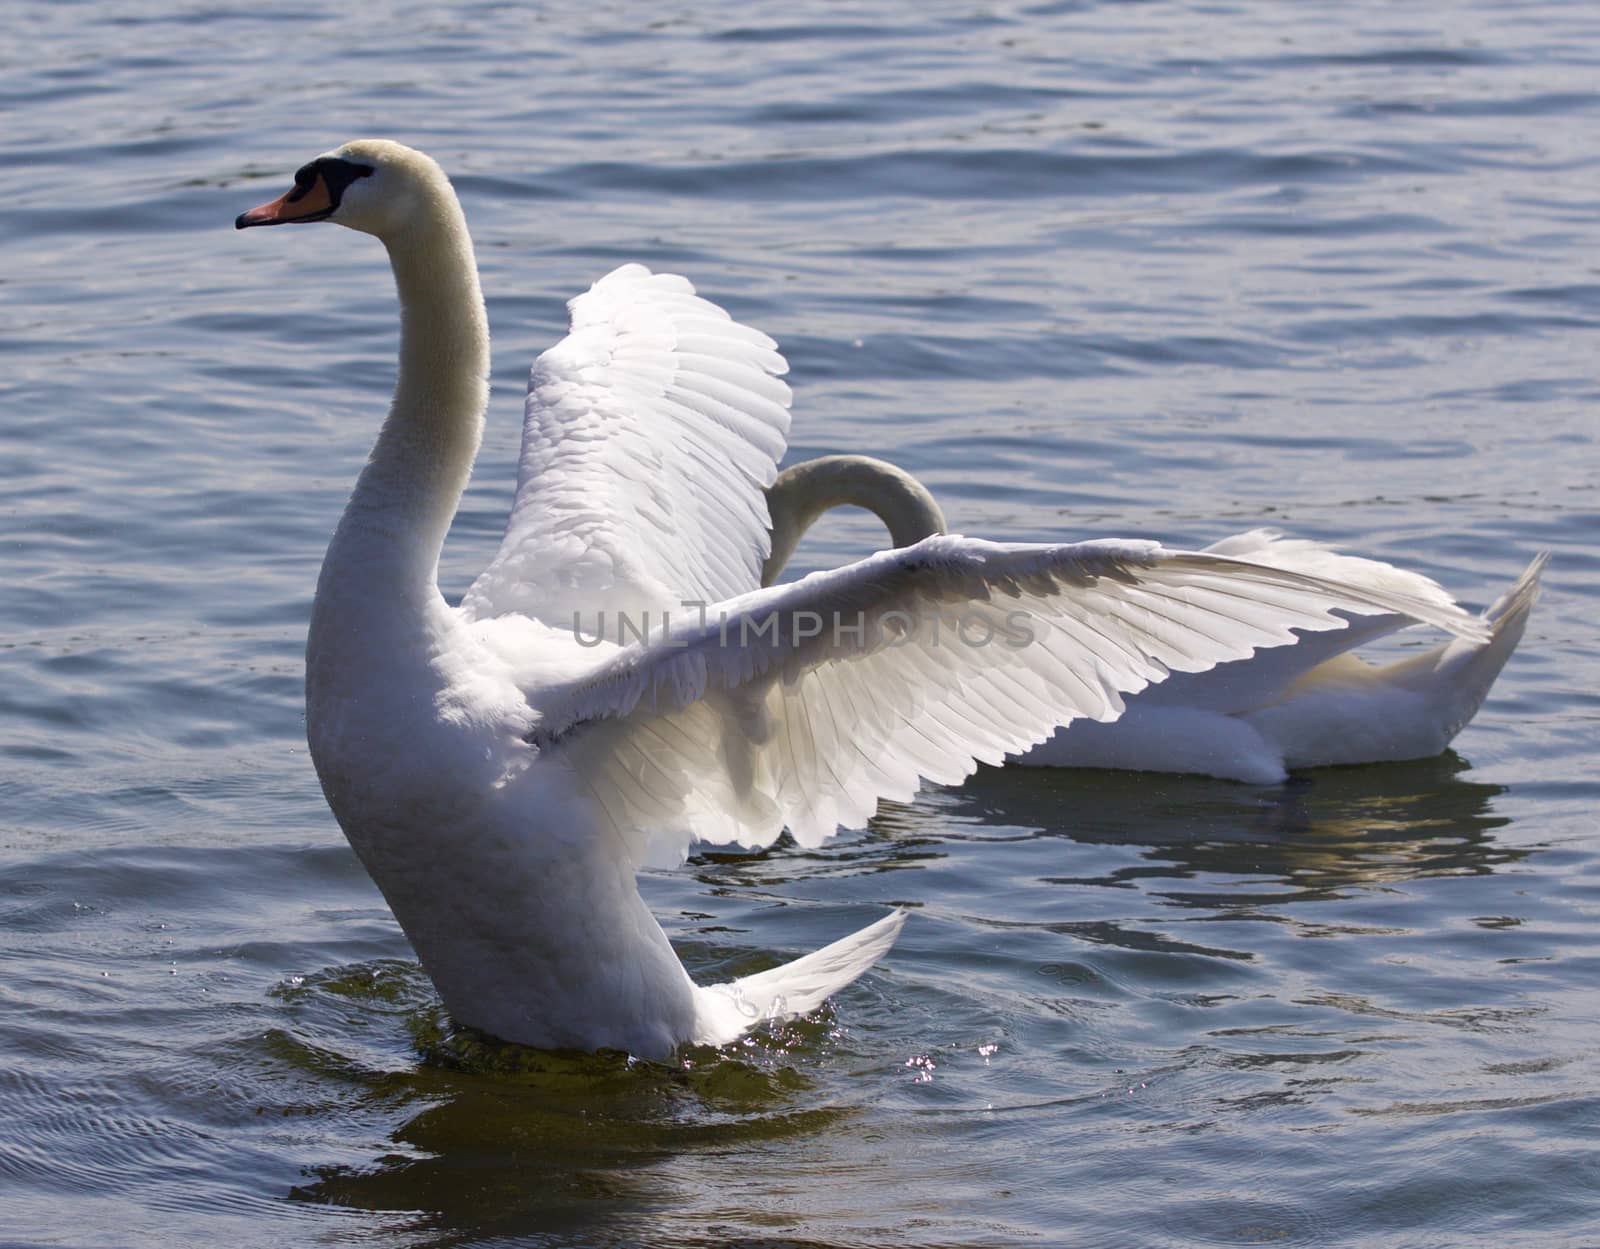 Beautiful isolated image with the swan showing his wings in the lake